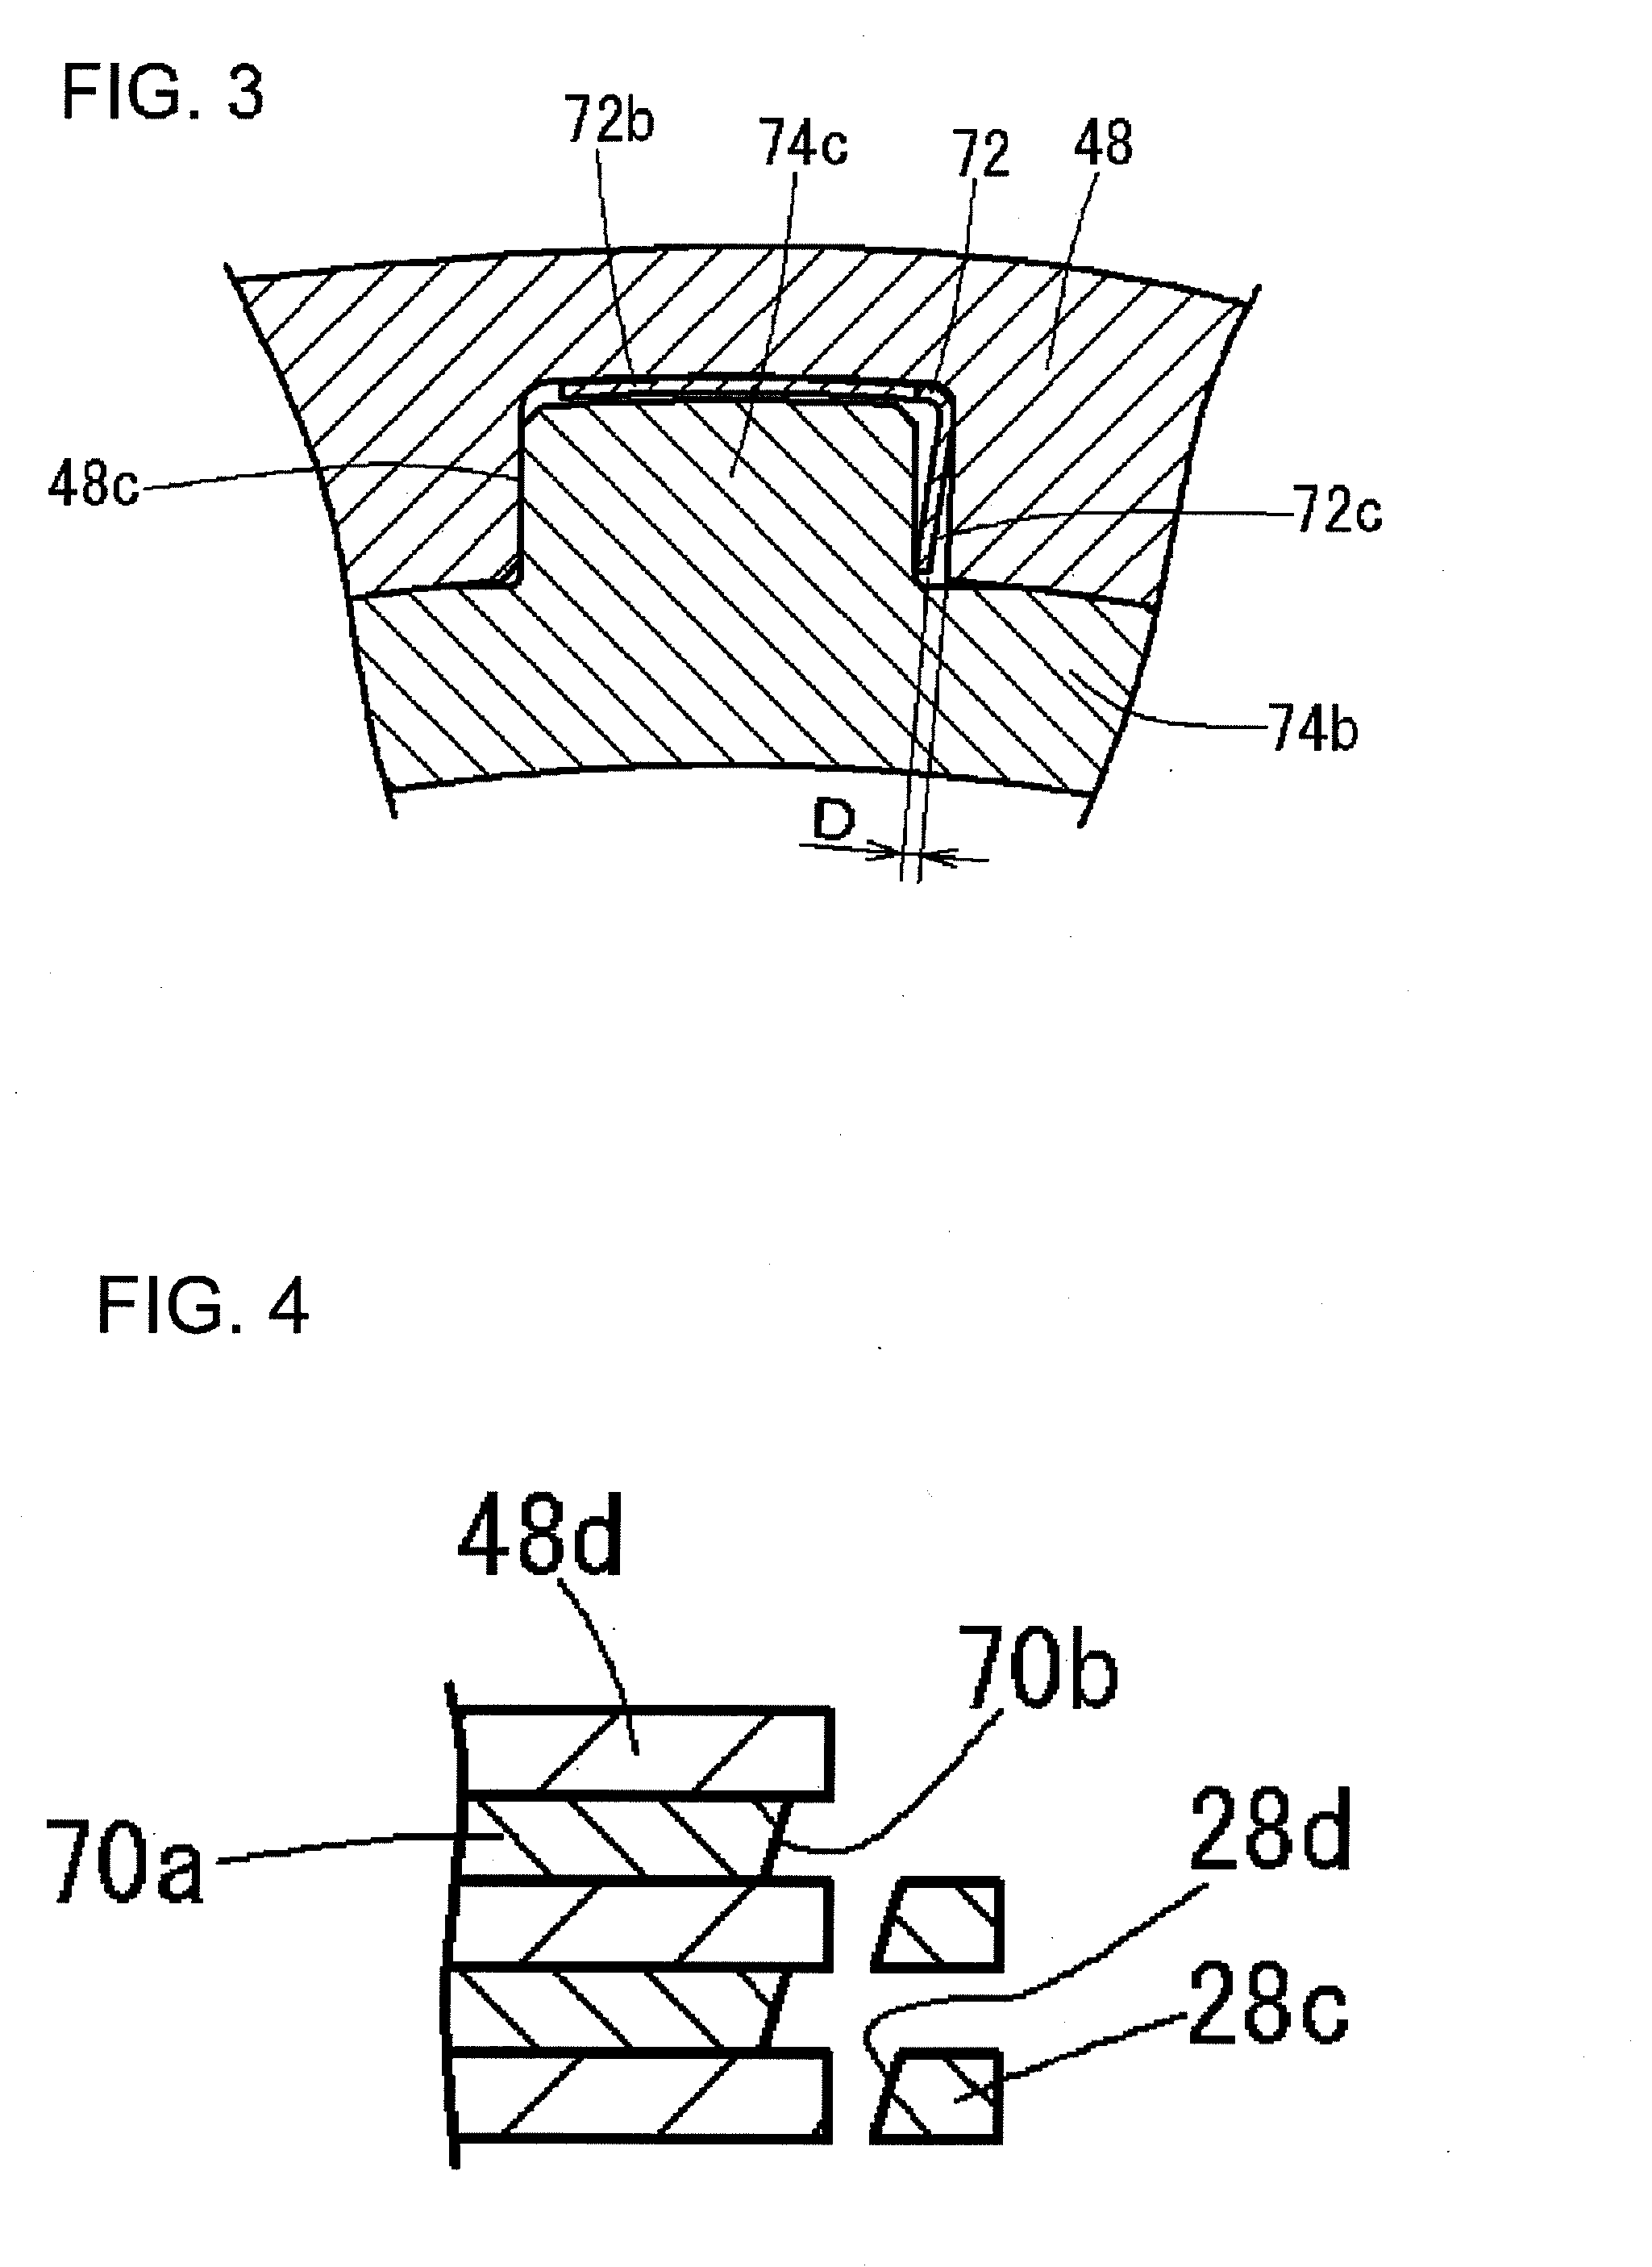 Drive device for hybrid electric vehicle